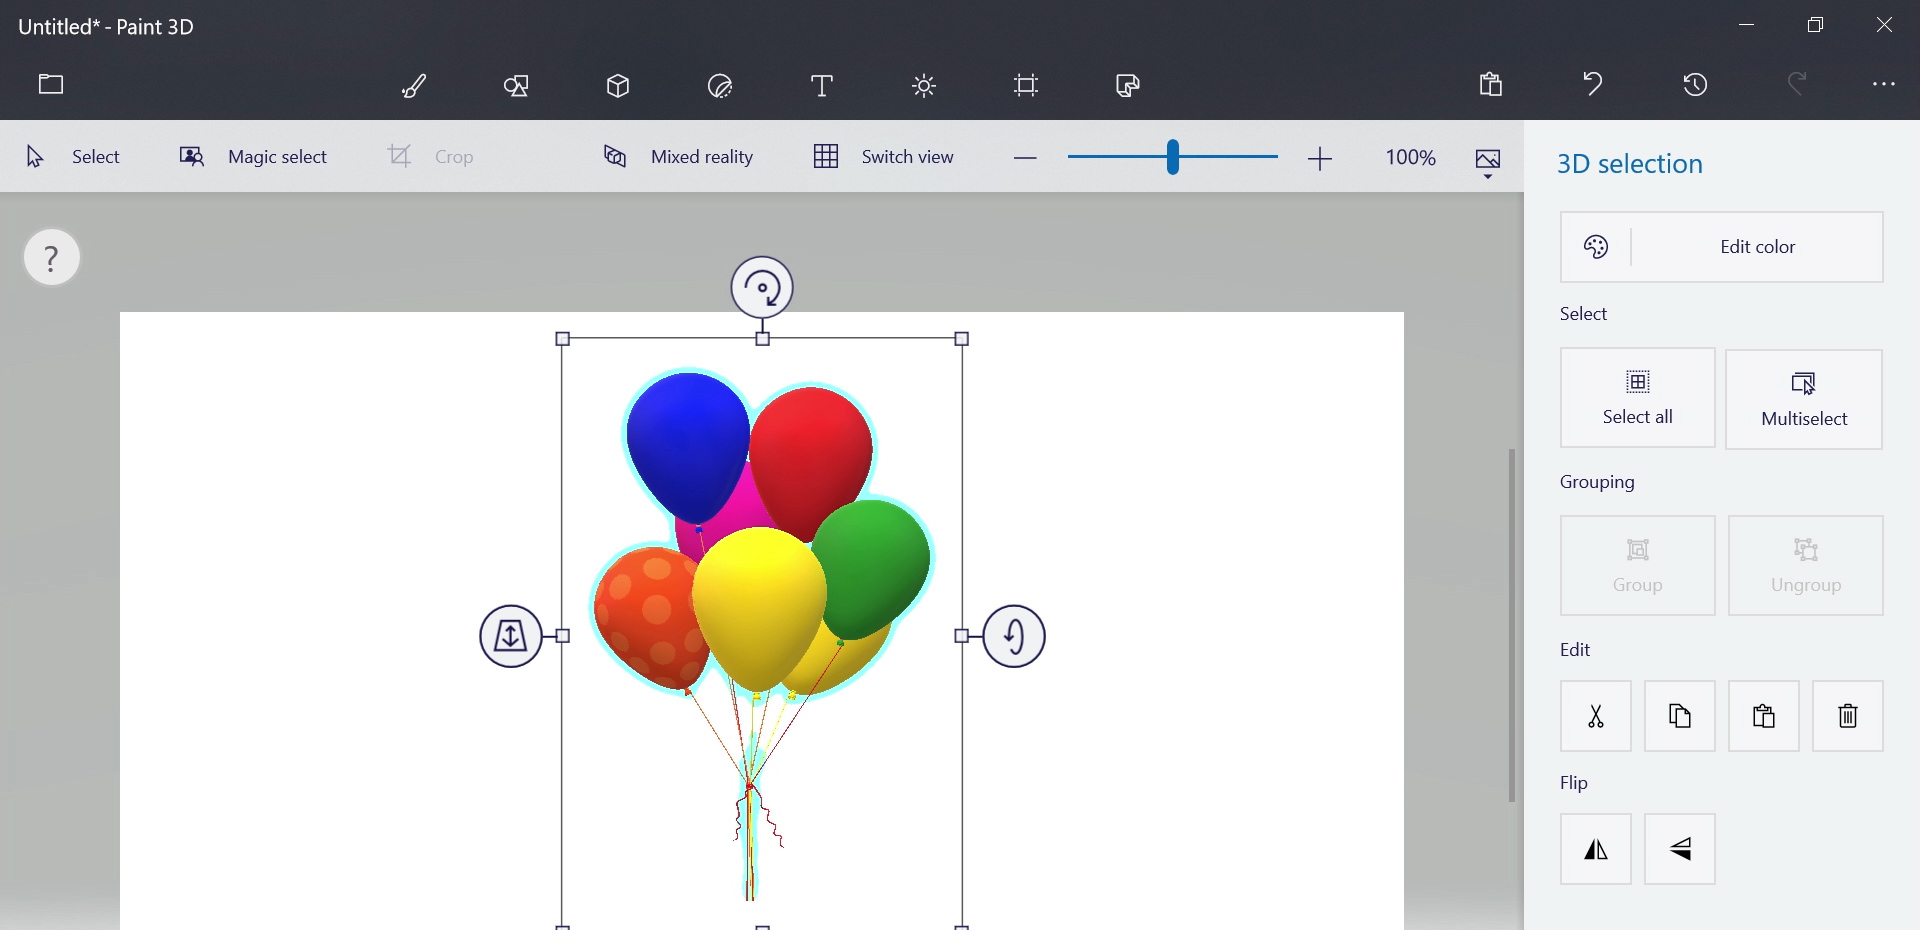 Balloons in Paint 3D